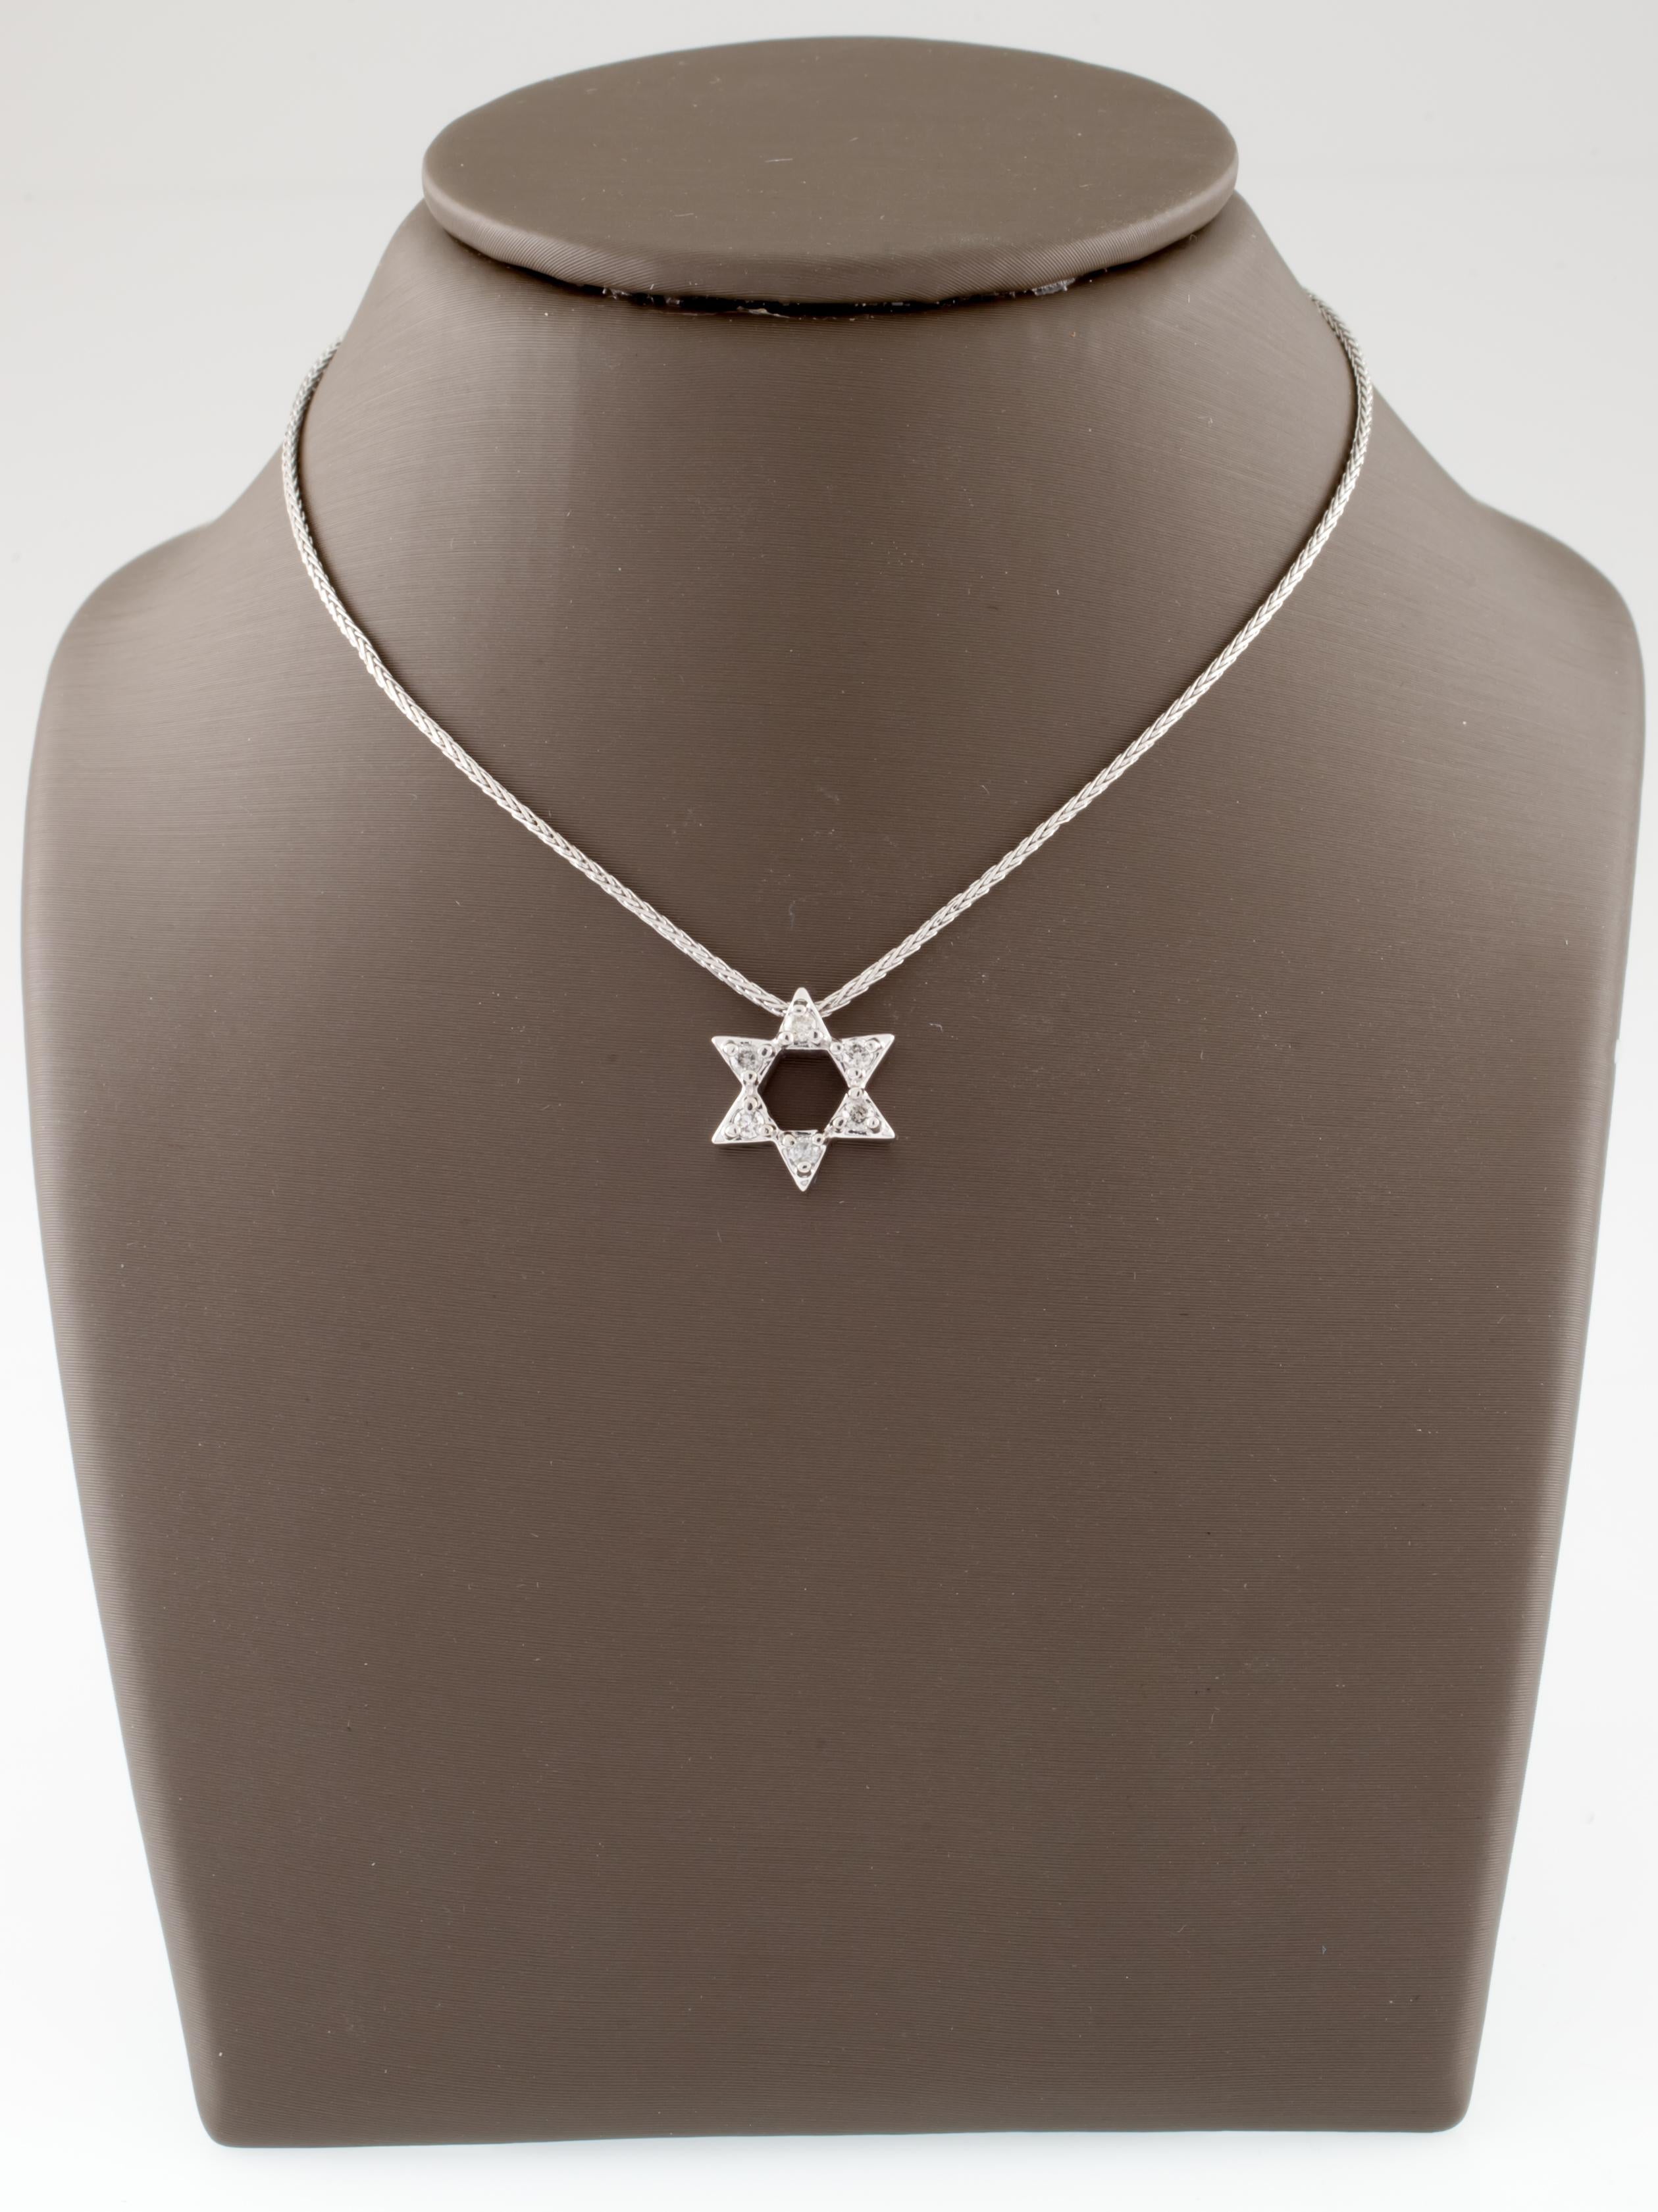 Gorgeous 10k White Gold Star of David Pendant
Each Star Arm Contains one Round Diamond
Total Diamond Weight = 0.15 ct
Average Color = H - I
Average Clarity = SI
Pendant is 11 mm in diameter
Includes 16